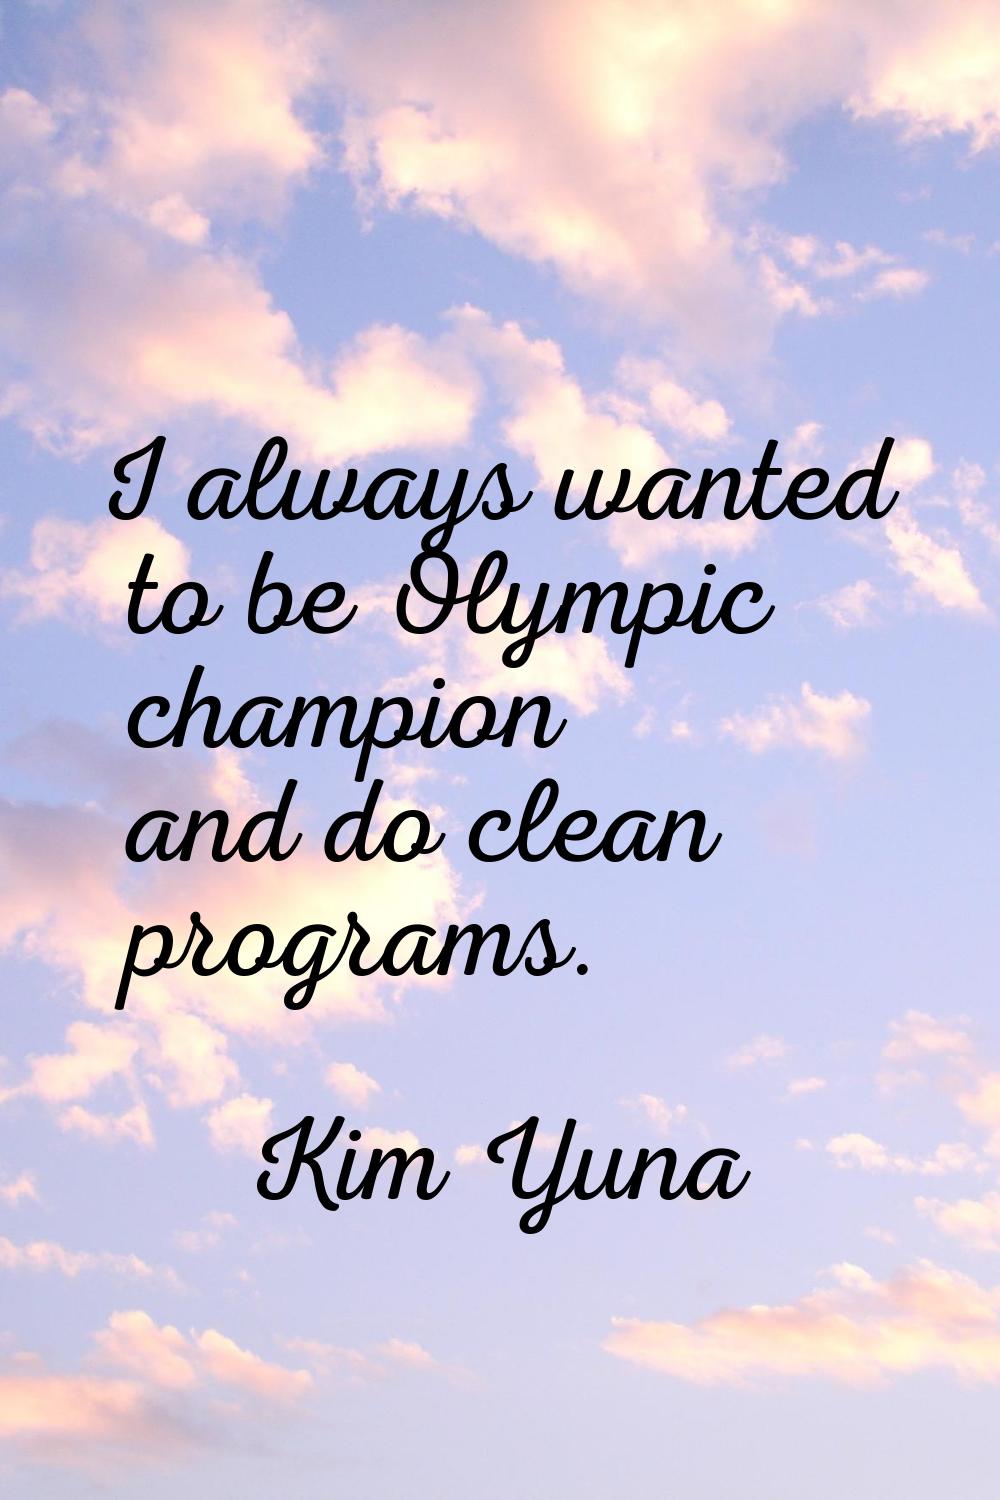 I always wanted to be Olympic champion and do clean programs.